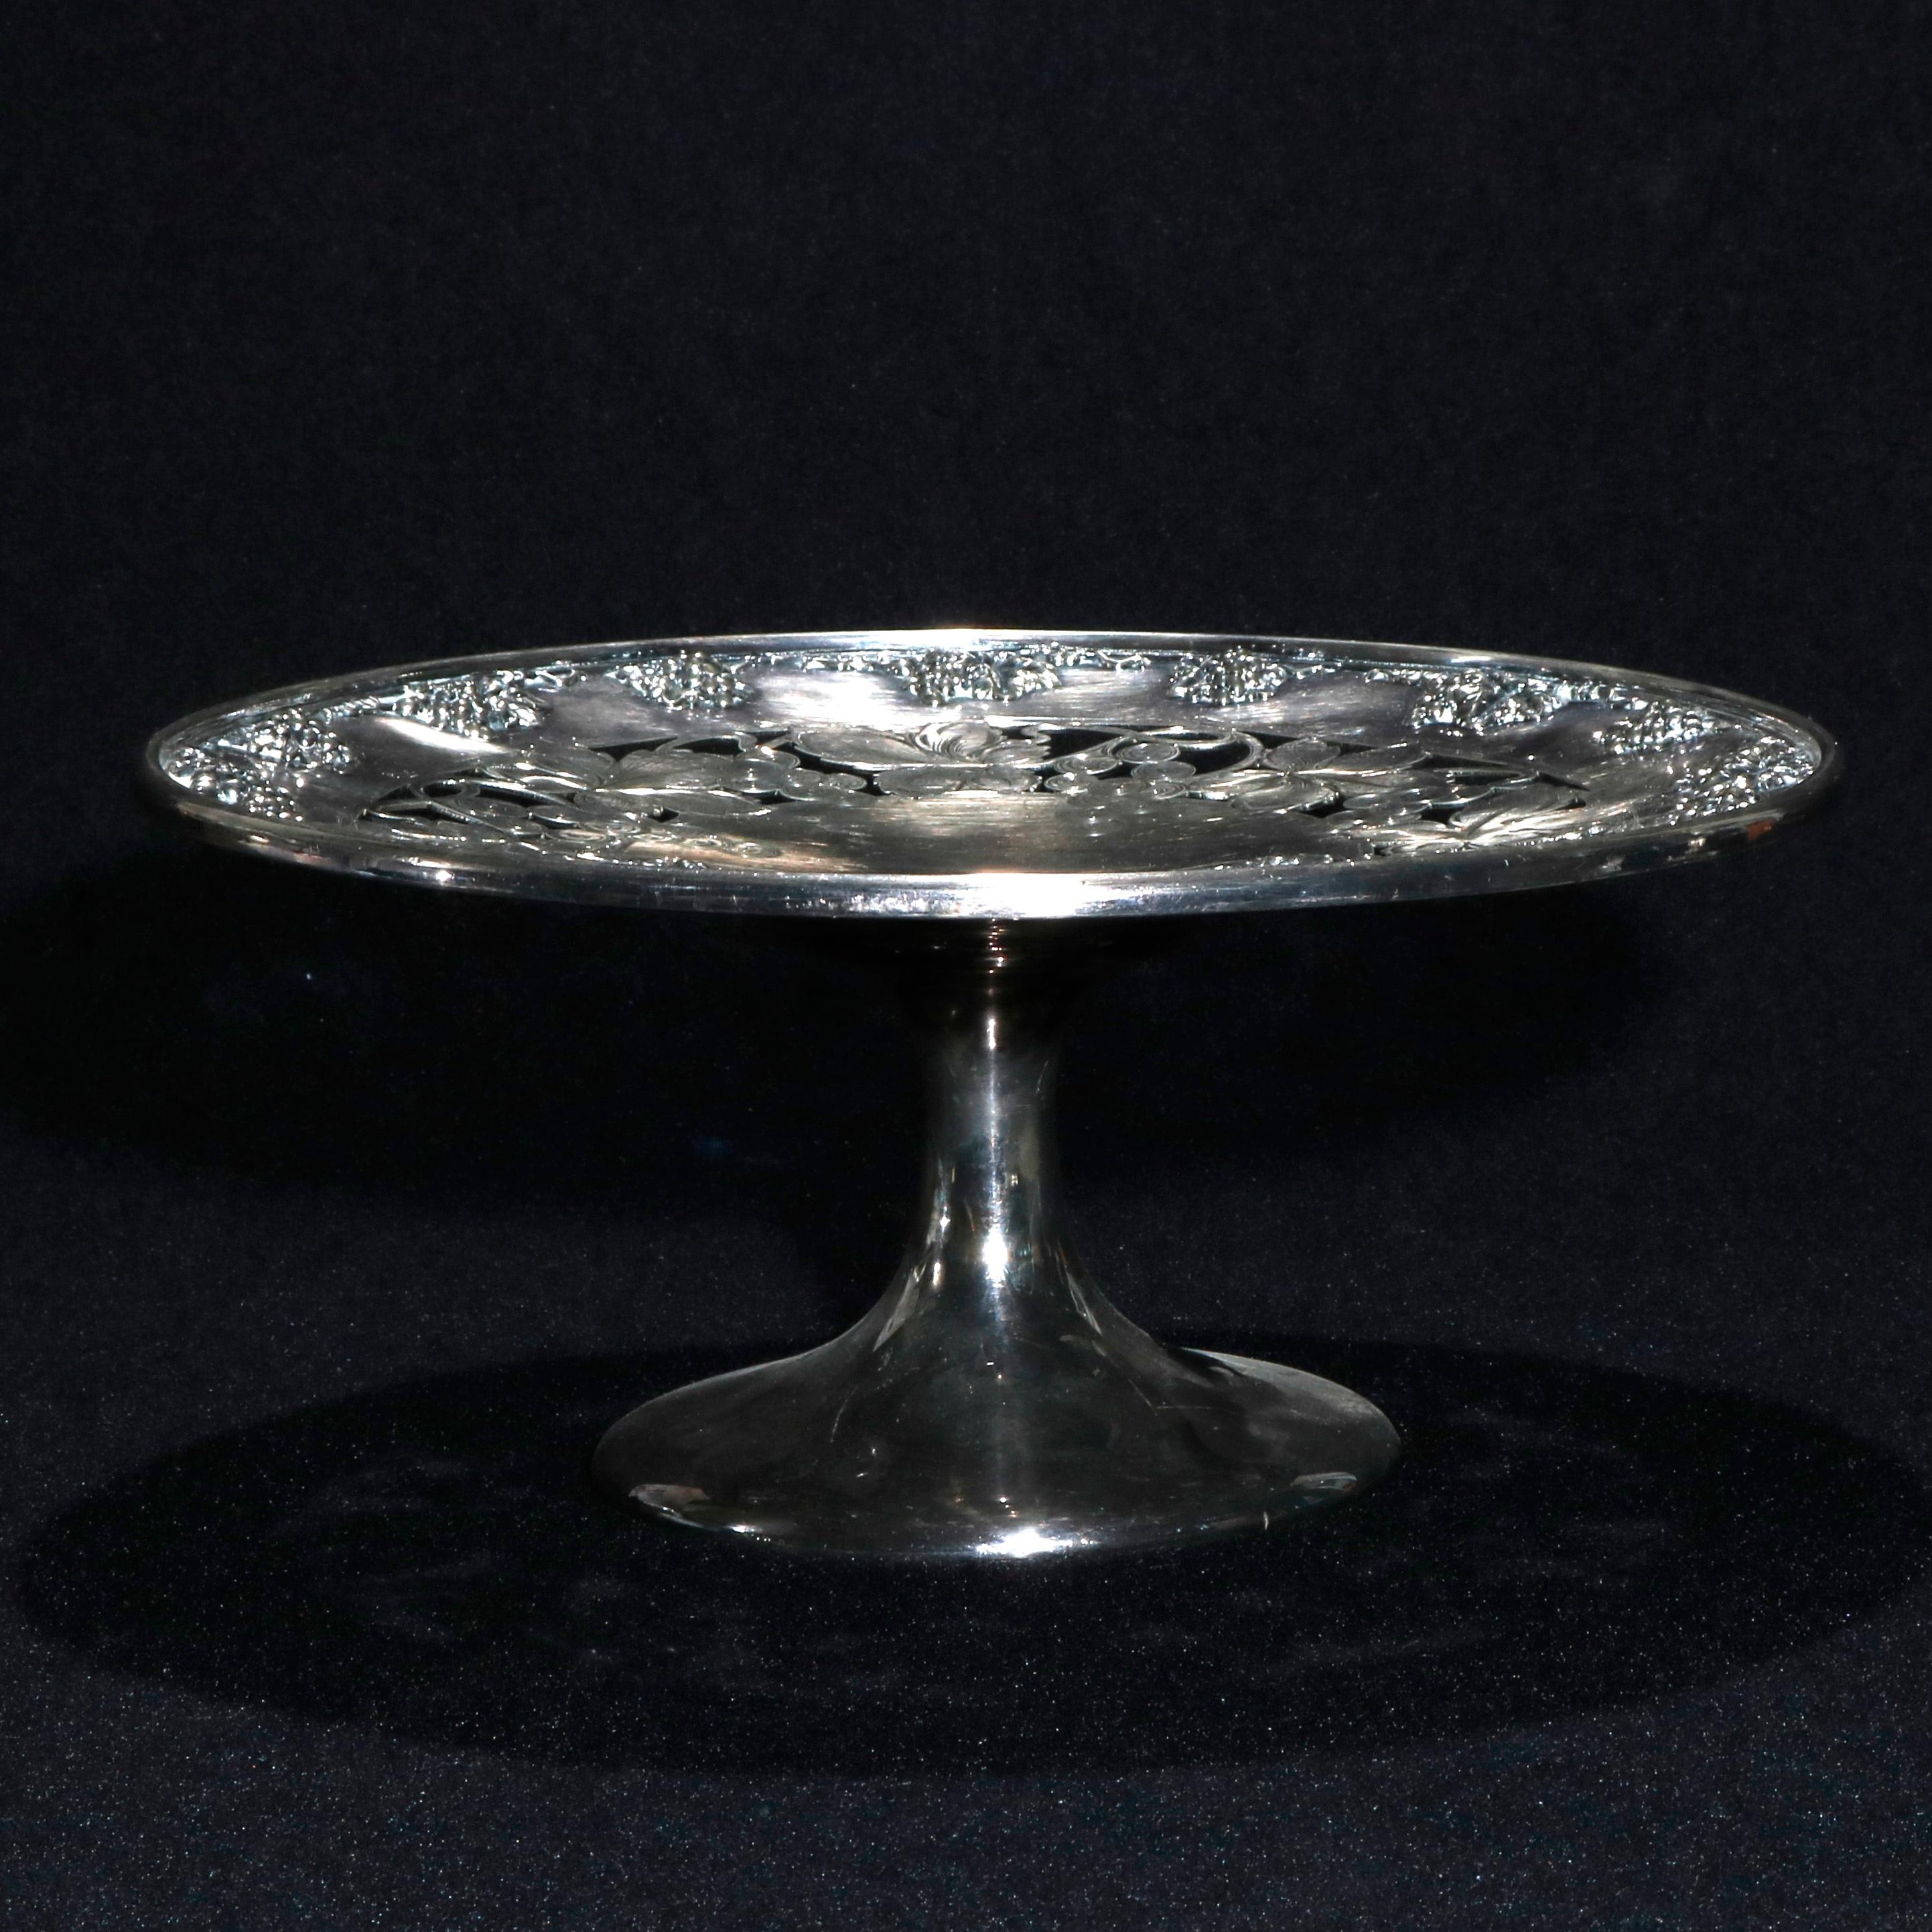 An antique Victorian silver plate compote offers bowl with reticulated rim having grape and leaf pattern, circa 1900

Measures: 5.5